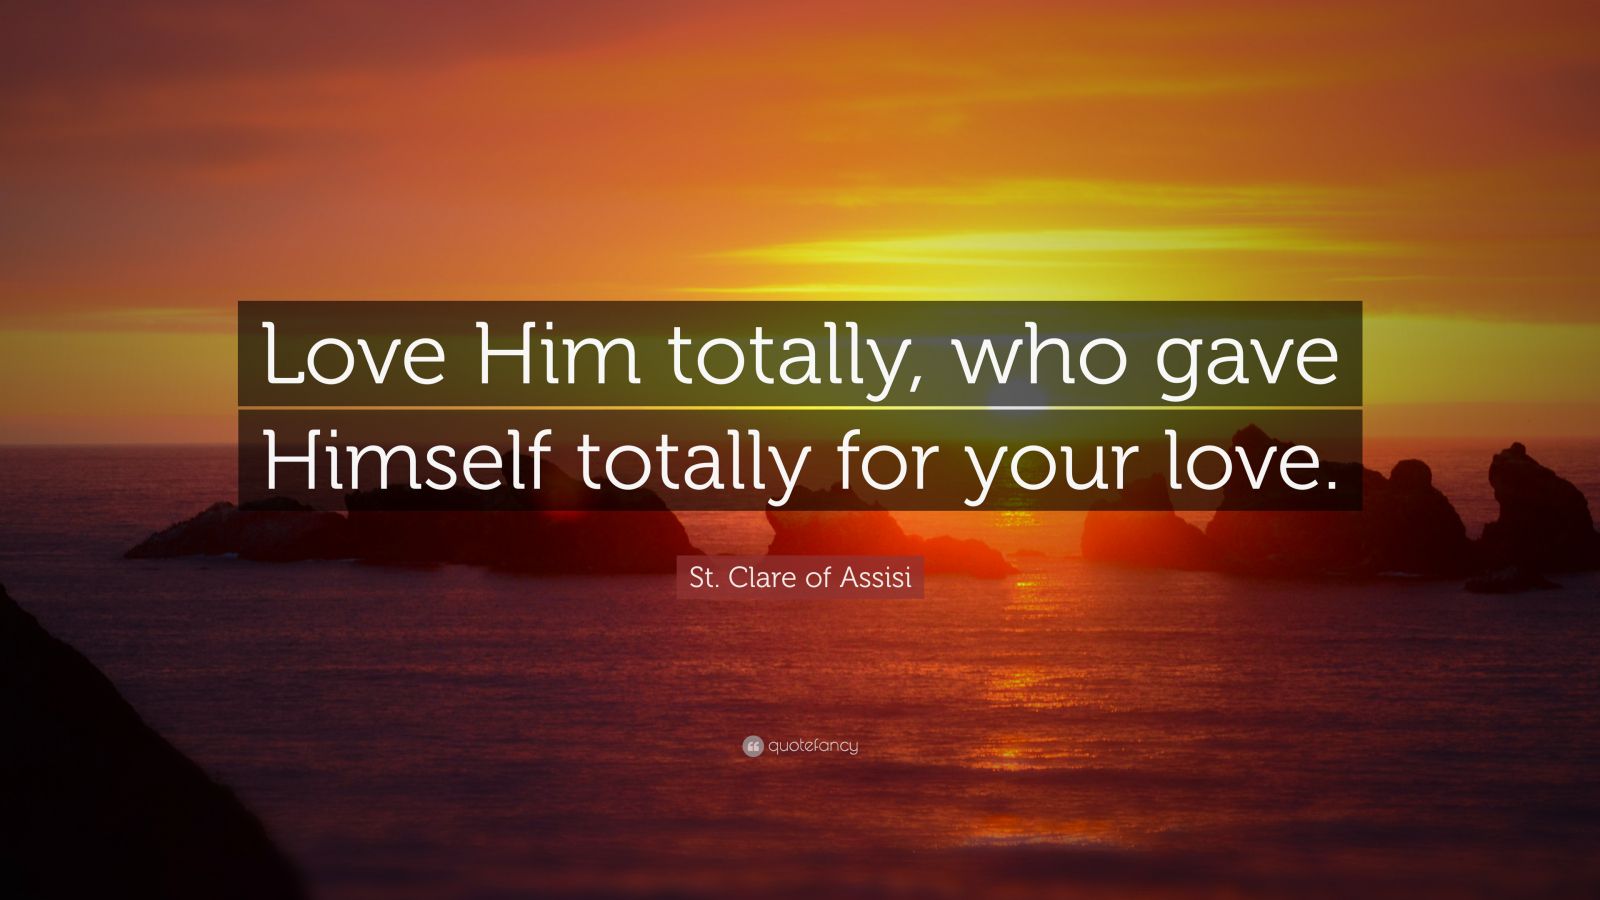 6430548 St Clare of Assisi Quote Love Him totally who gave Himself totally